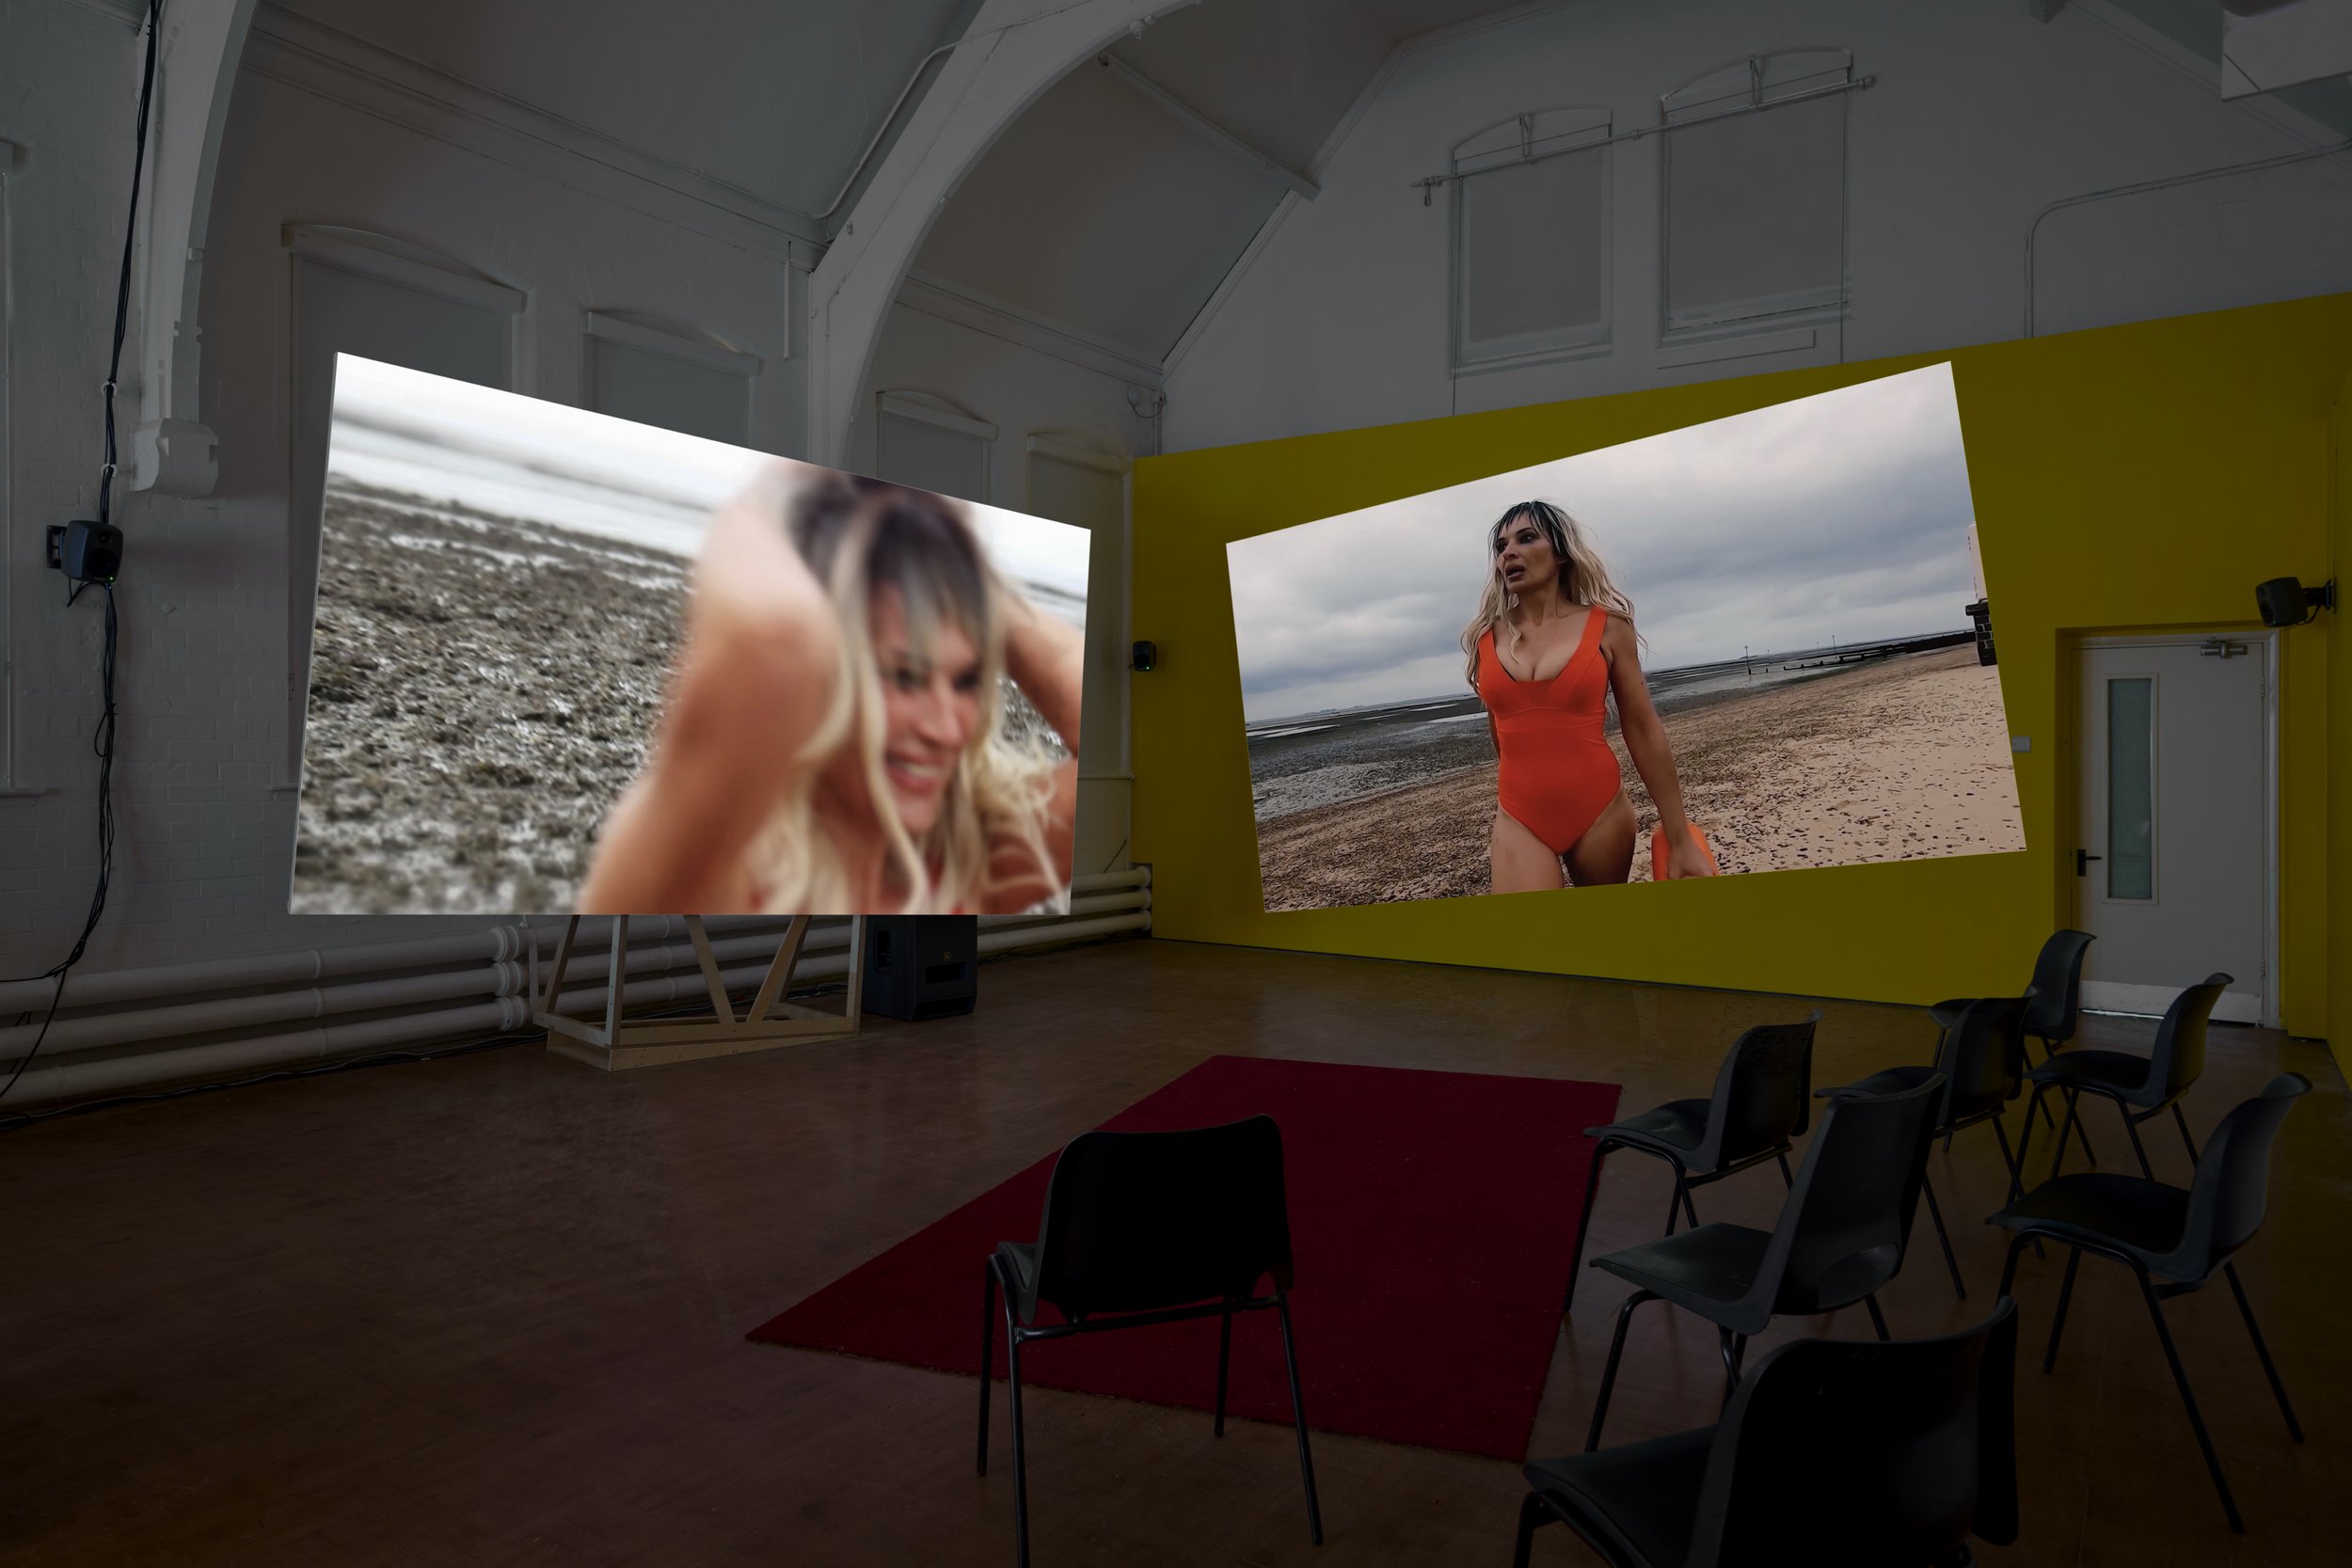 Ruth Angel Edwards &amp; Chloée Maugile | THE WALL &amp; Hyperopia (2023), Primary. Photos by Reece Straw